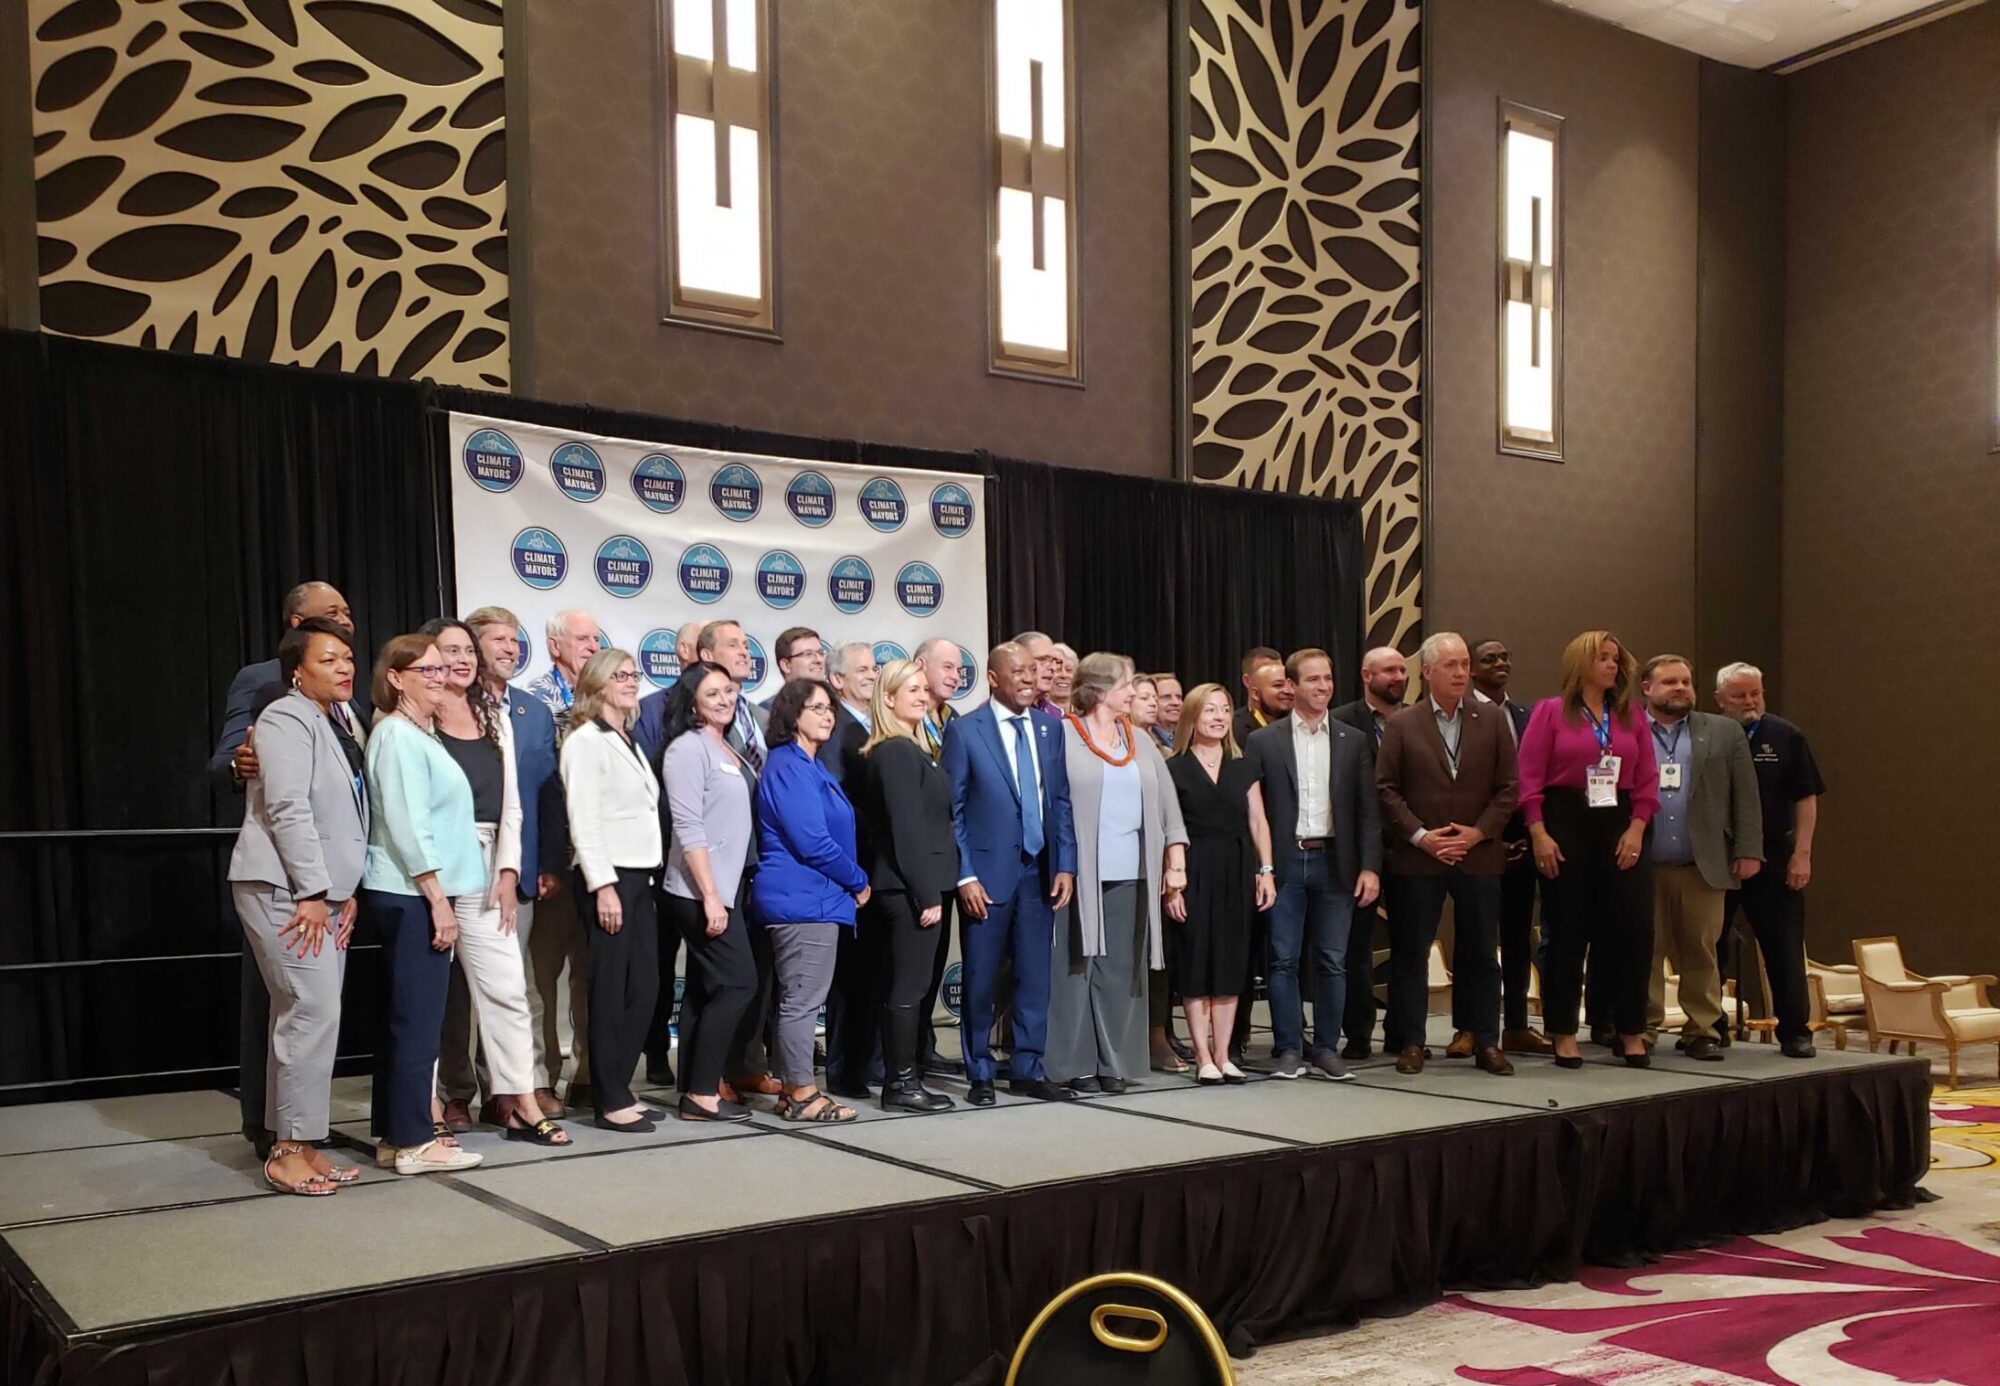 Cooperation and Collaboration: Takeaways From the 90th Annual United States Conference of Mayors